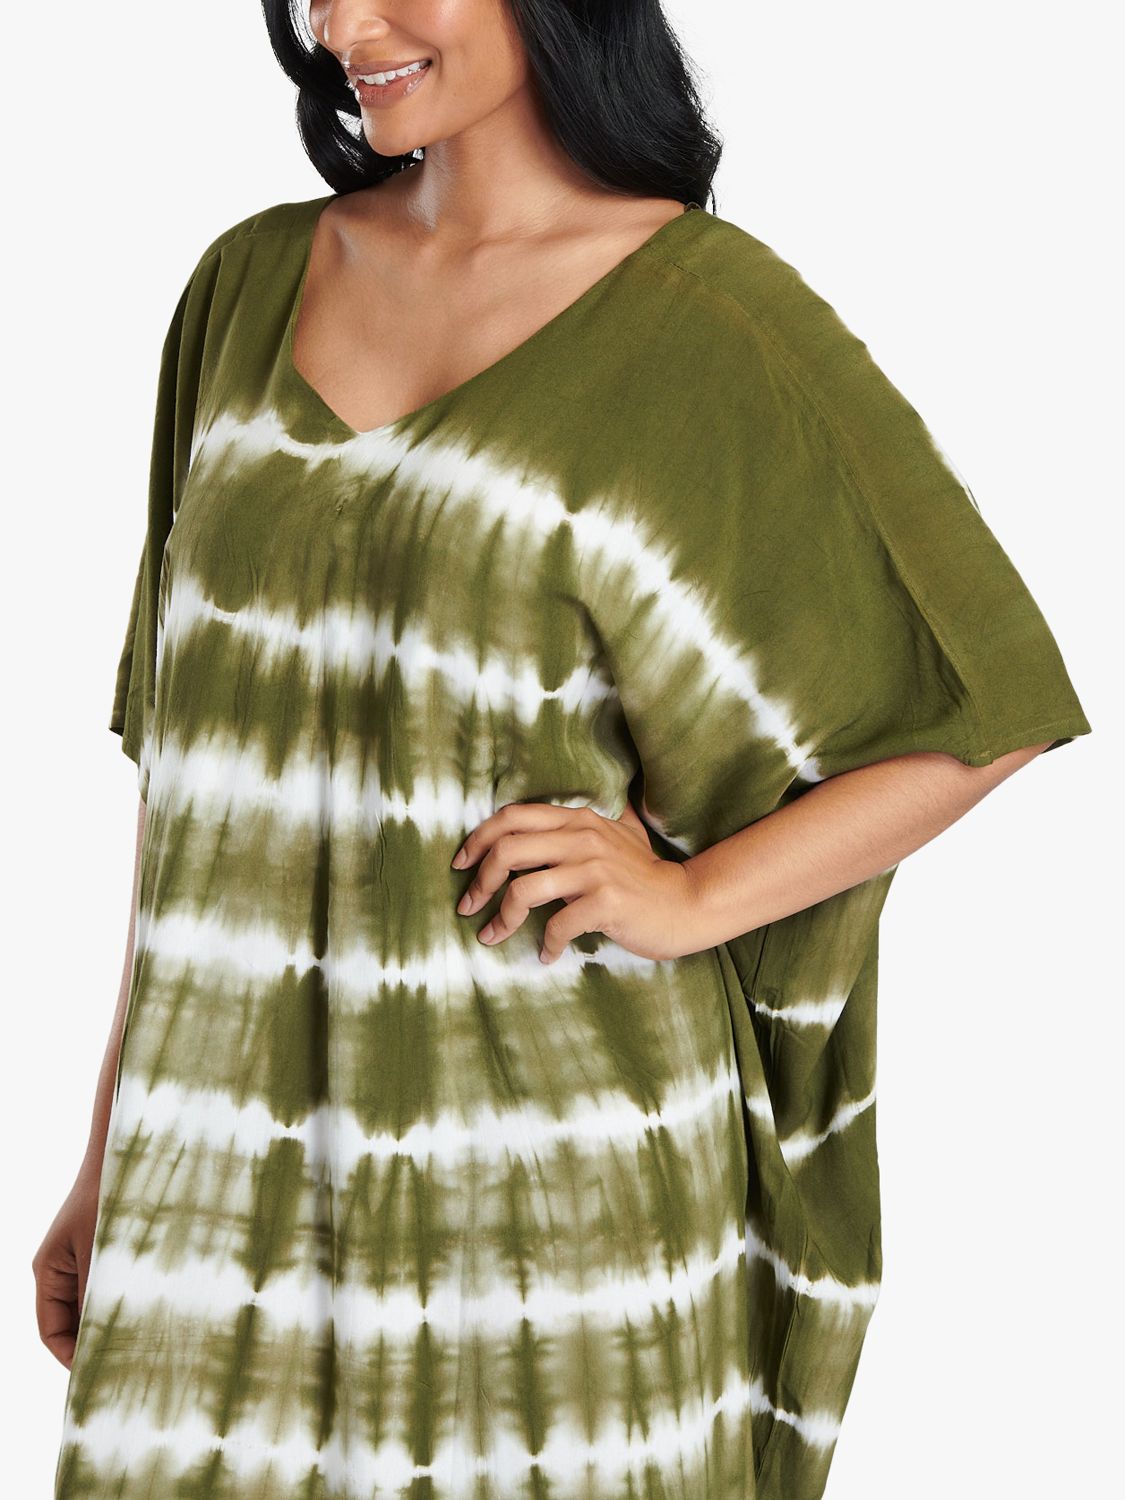 Buy South Beach Striped Tie Dye Maxi Dress, Olive/White Online at johnlewis.com